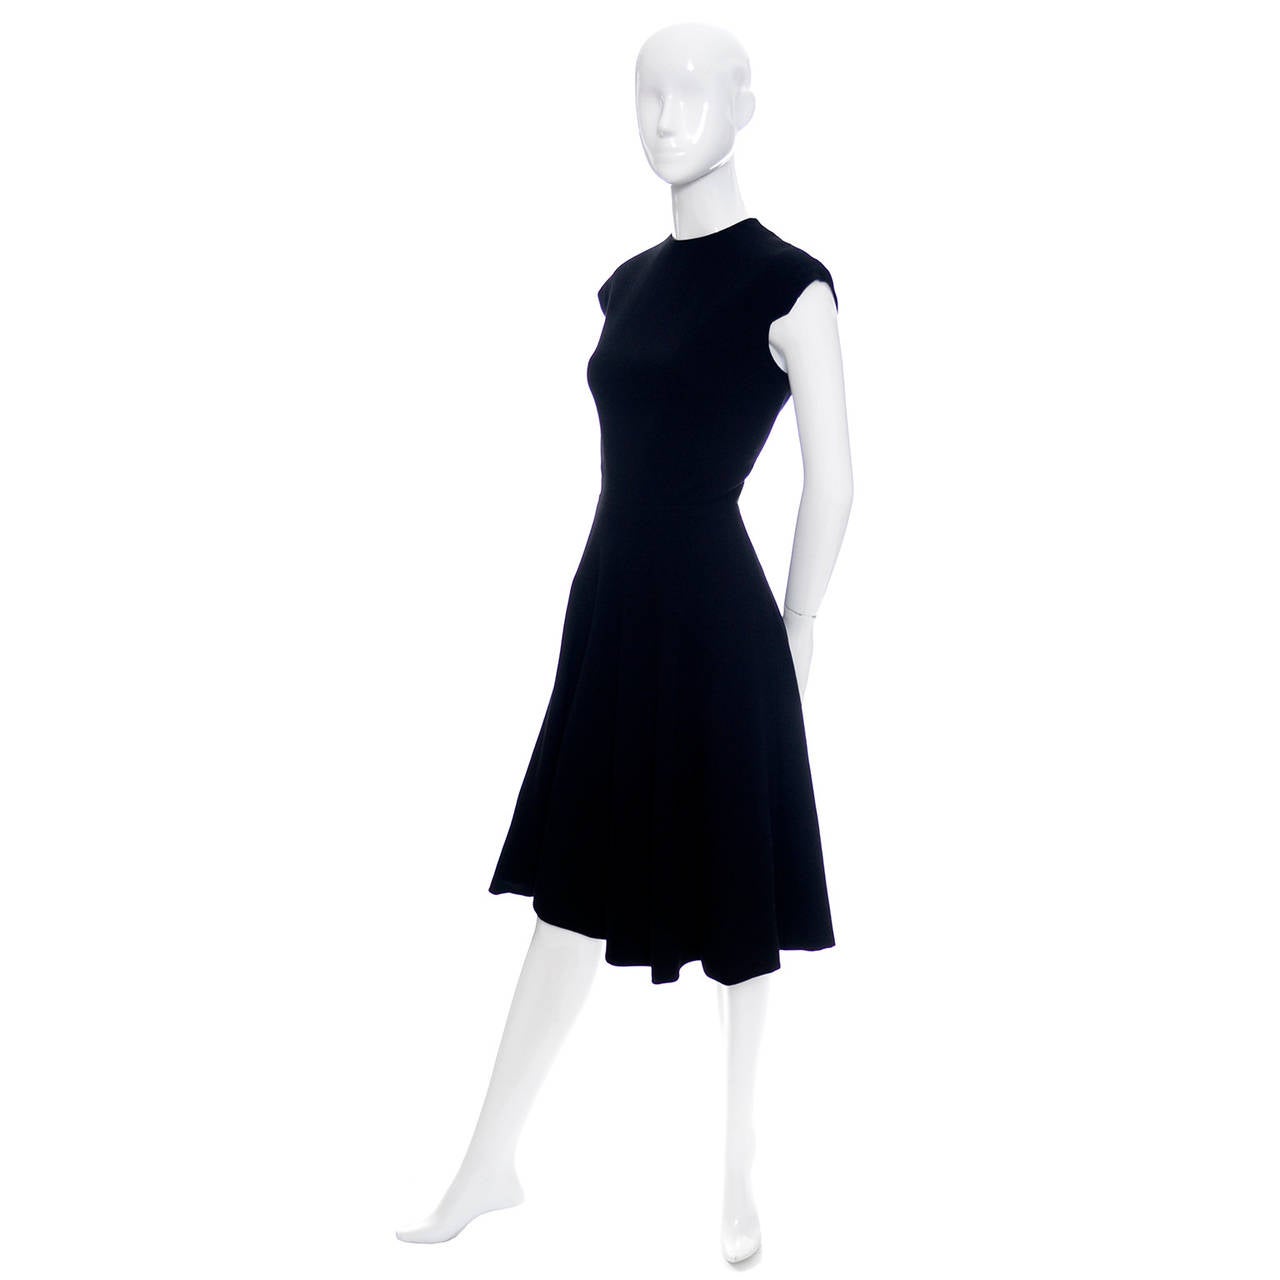 Beautiful early 1970' classic wool crepe black vintage dress from designer Pauline Trigere. This dress has pretty detailed cap sleeves, a fitted waist, and a flounce skirt.  The dress was purchased at Saks Fifth Avenue and it is in mint condition.